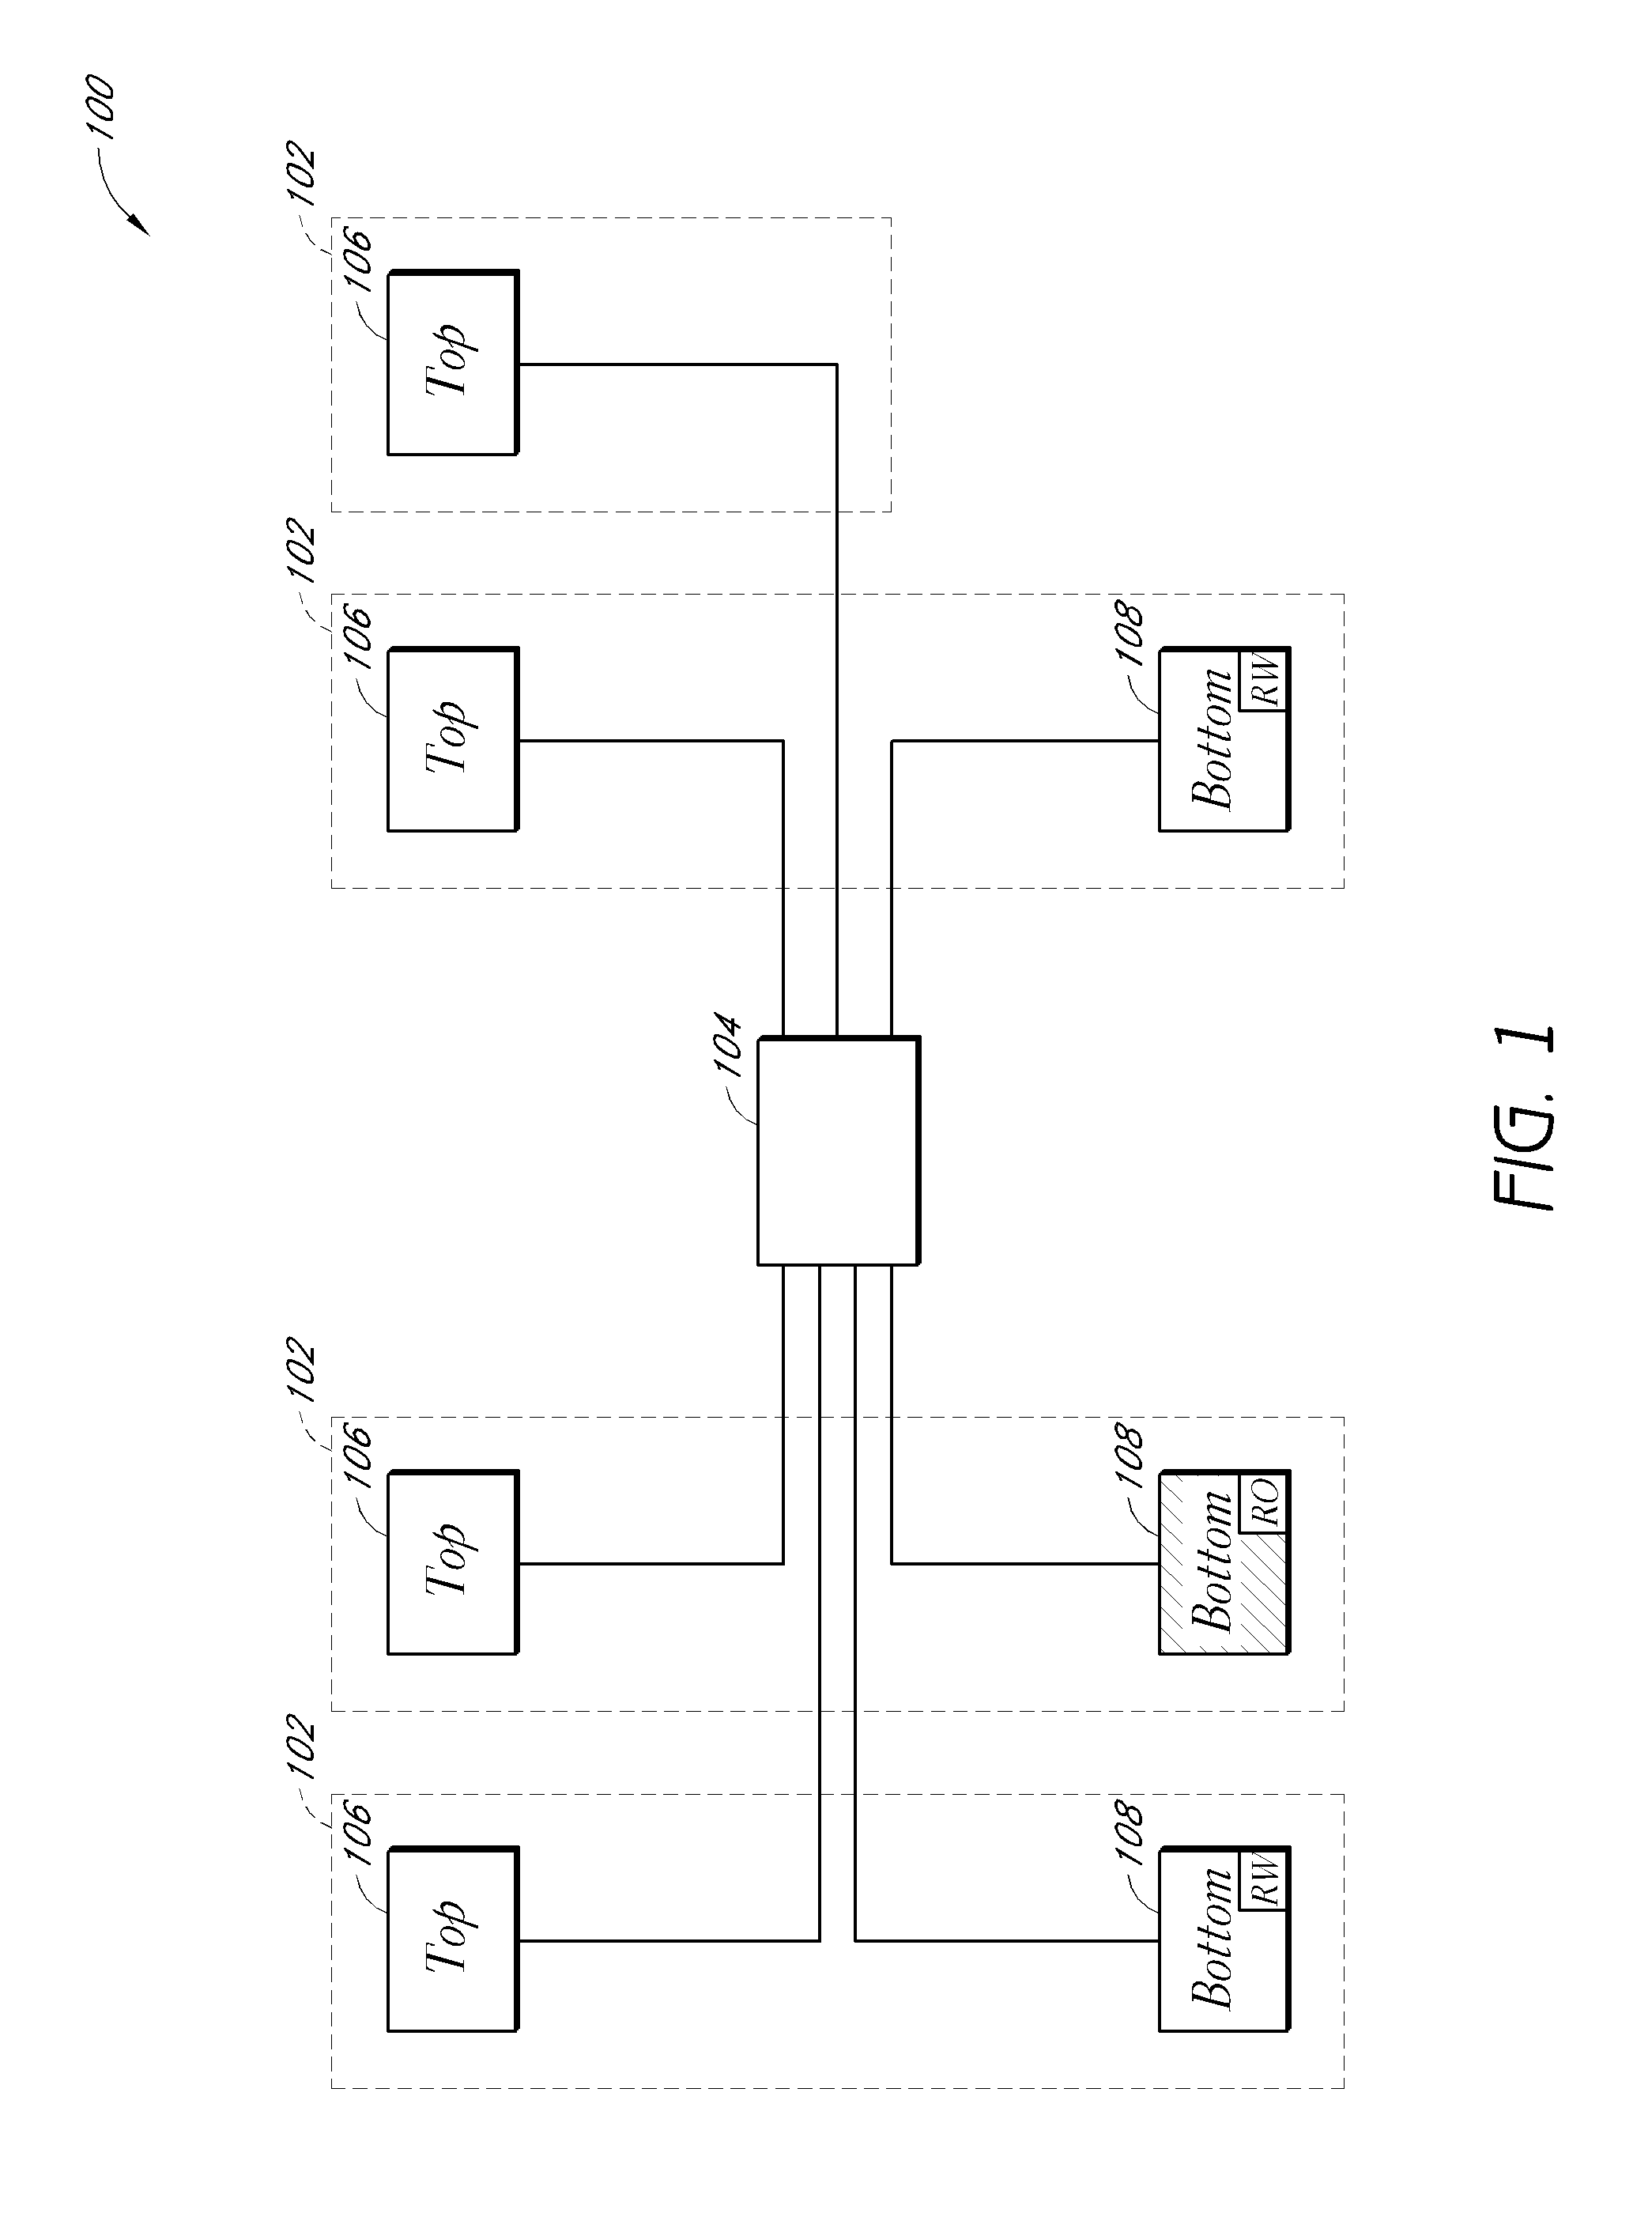 Systems and methods for a read only mode for a portion of a storage system